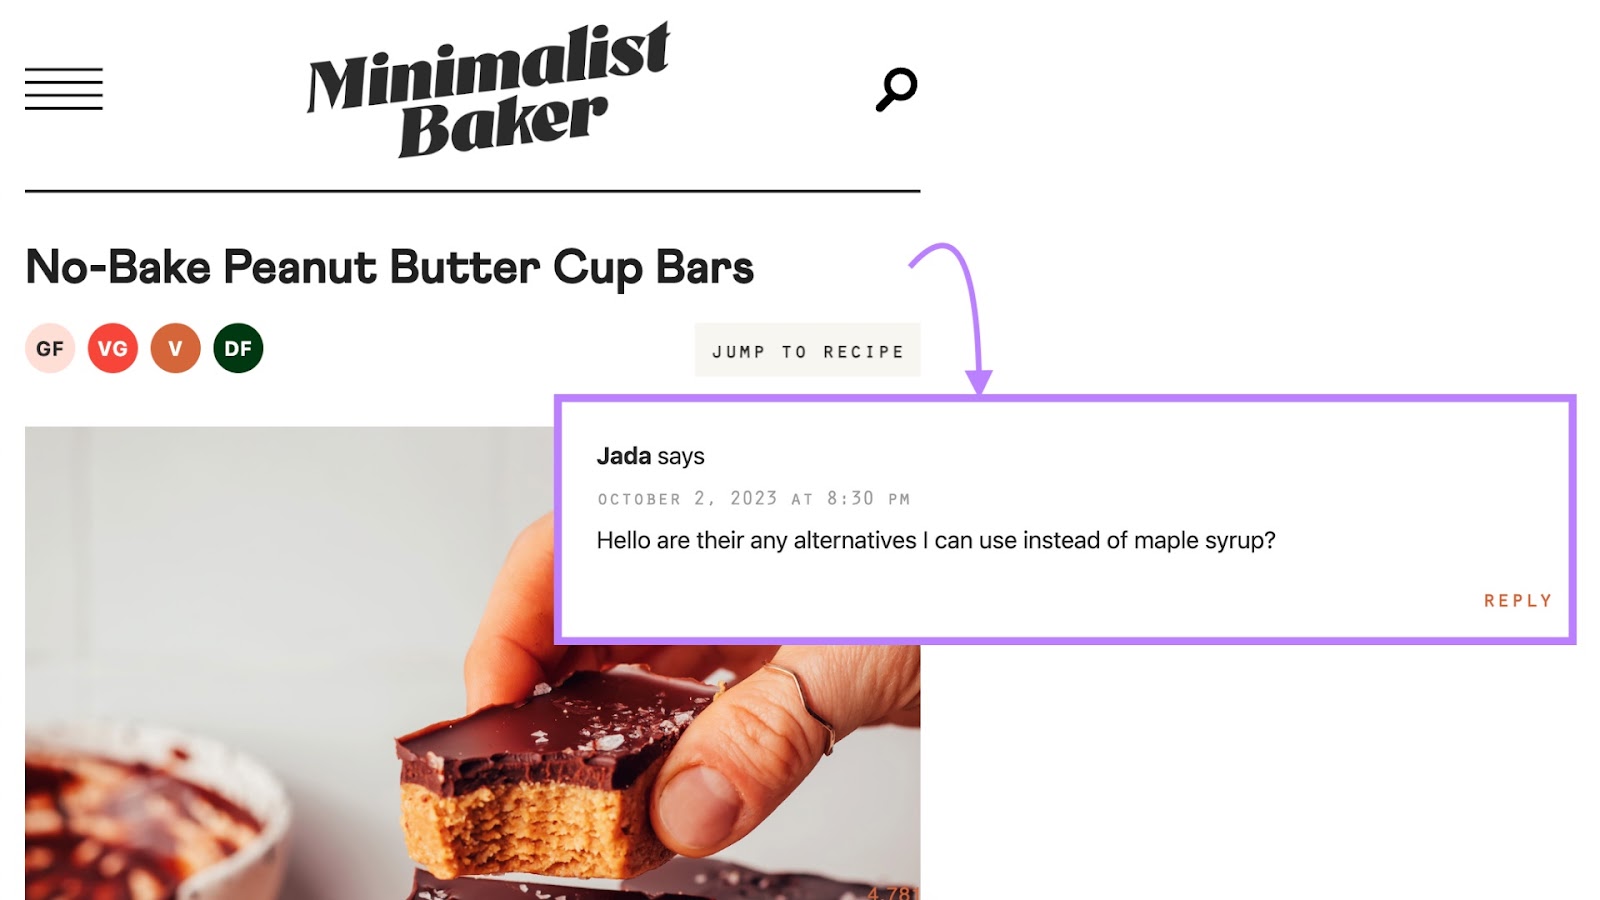 Minimalist Baker's station  connected  no-bake peanut food  cupful  bars with a remark  highlighted